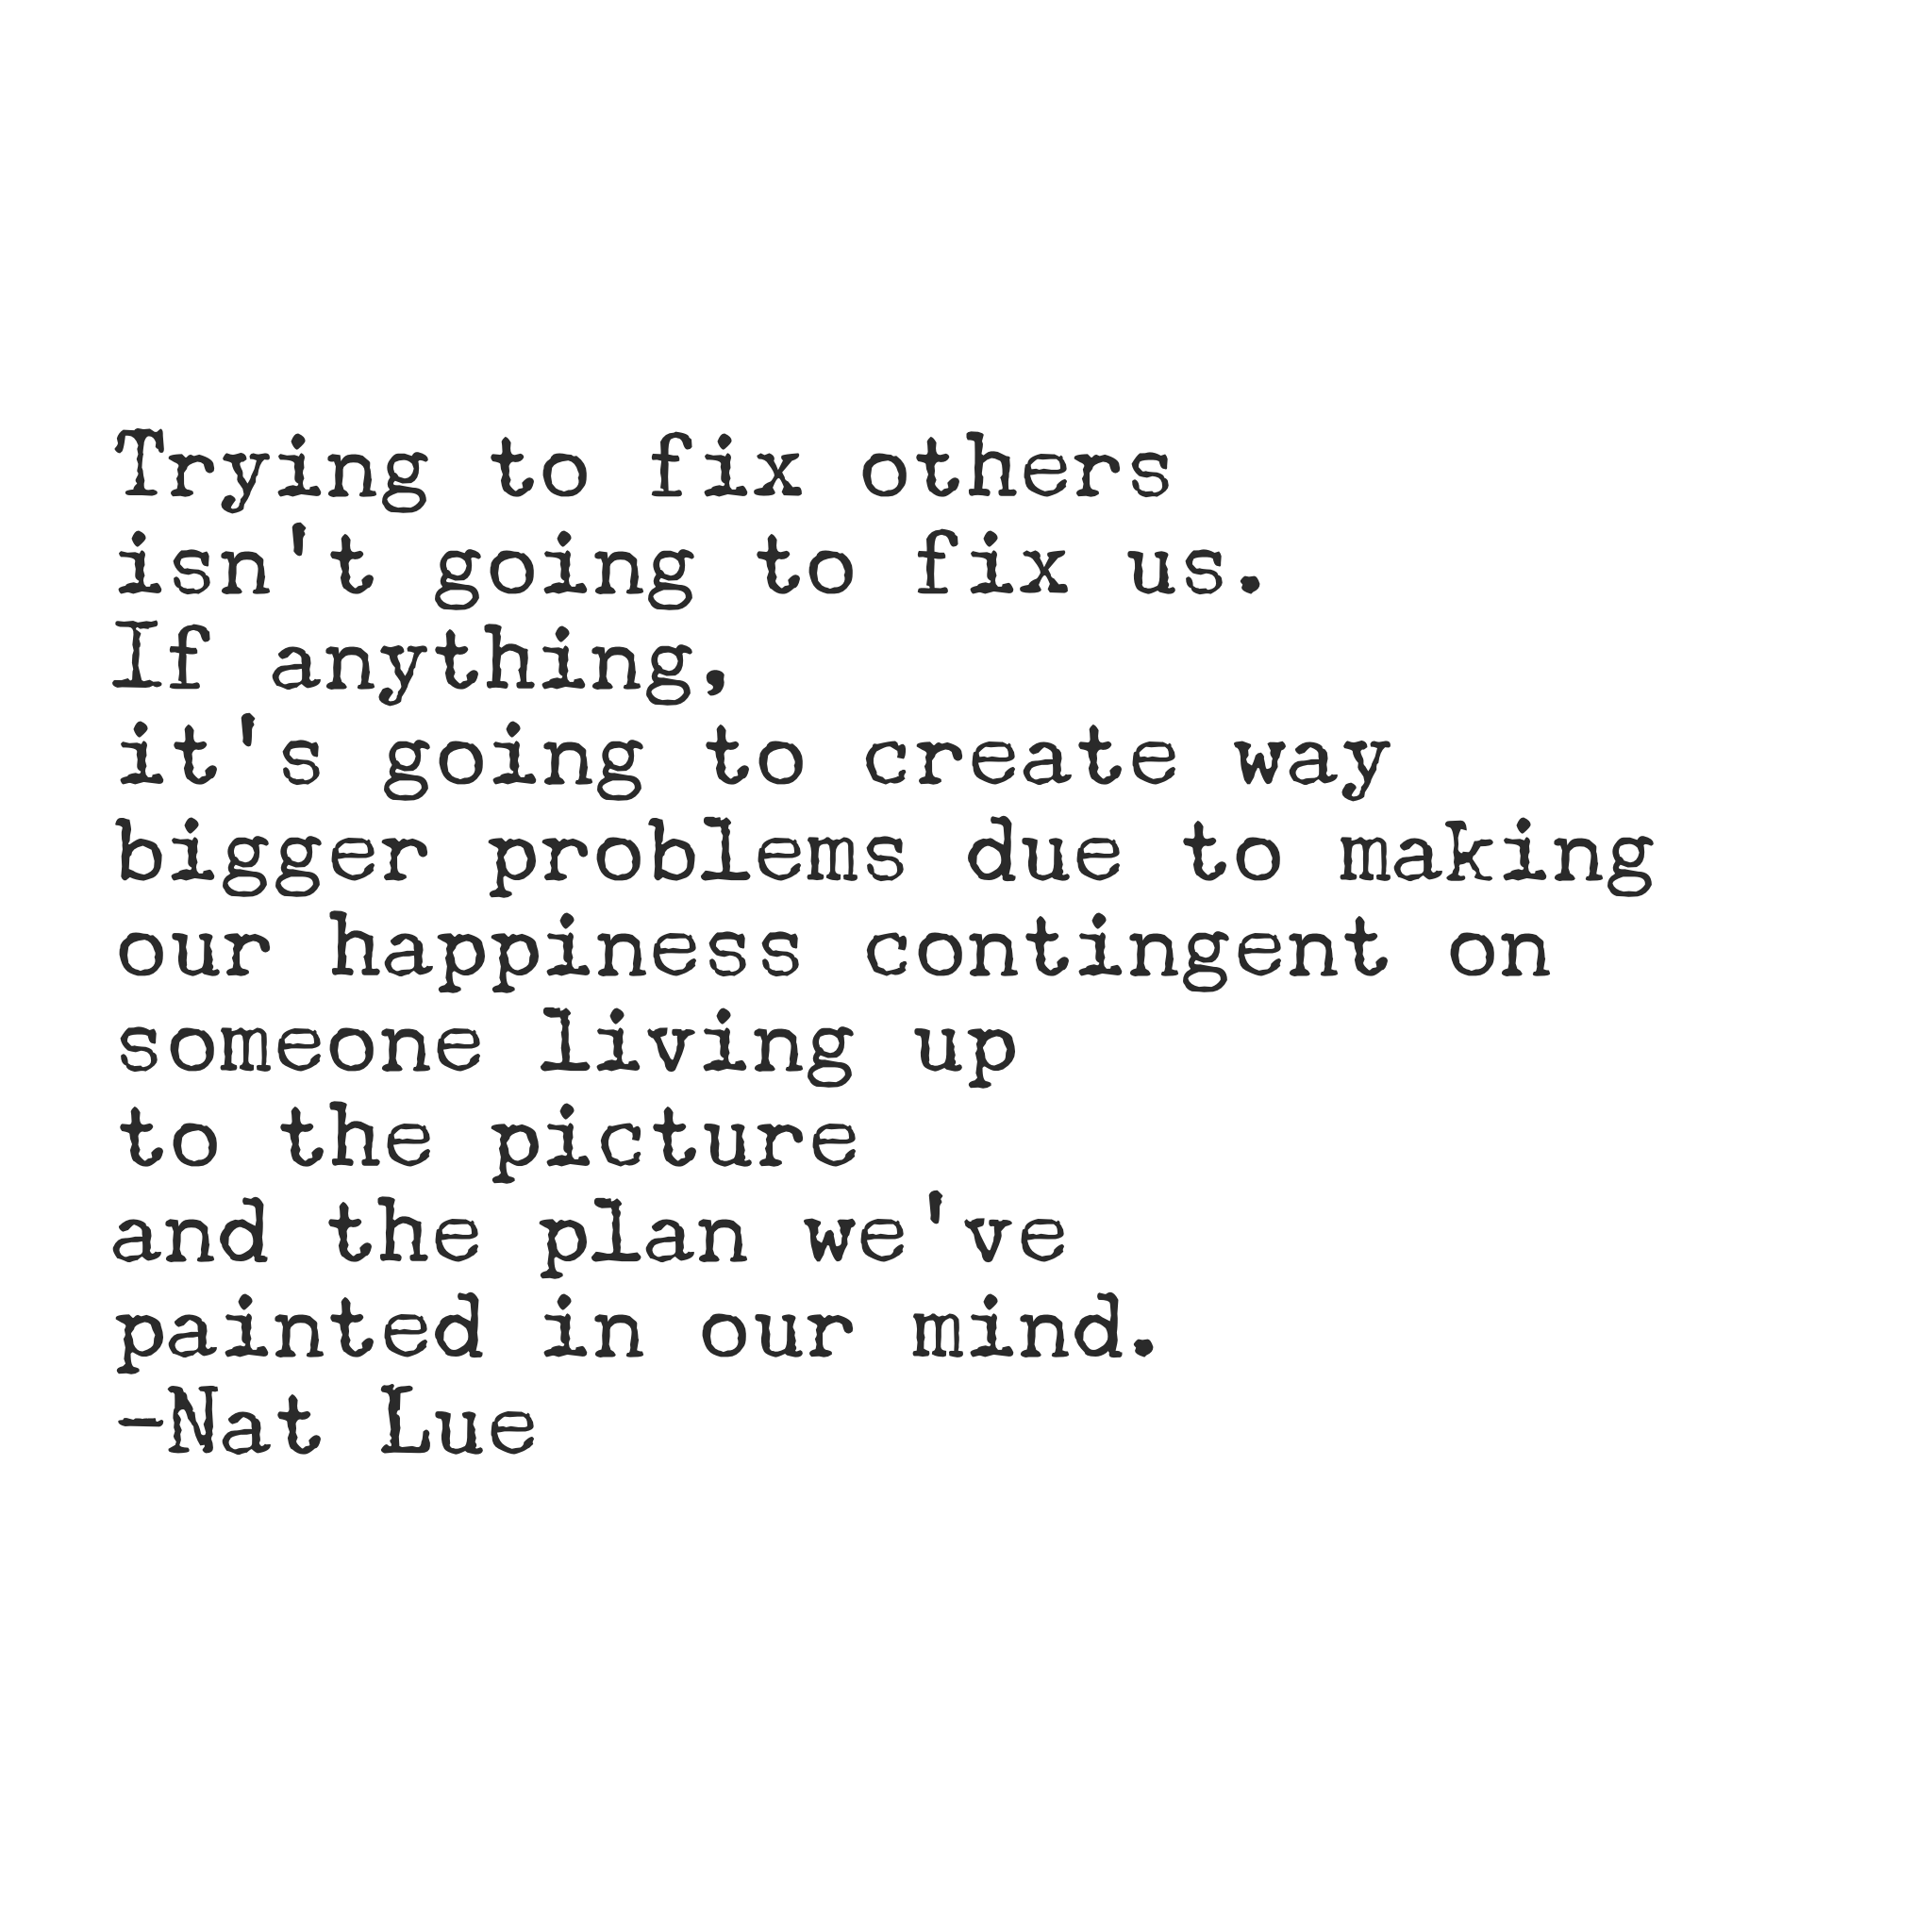 Trying to fix others isn't going to fix us. If anything, it's going to create way bigger problems due to making our happiness contingent on someone living up to the picture and the plan we've painted in our mind.